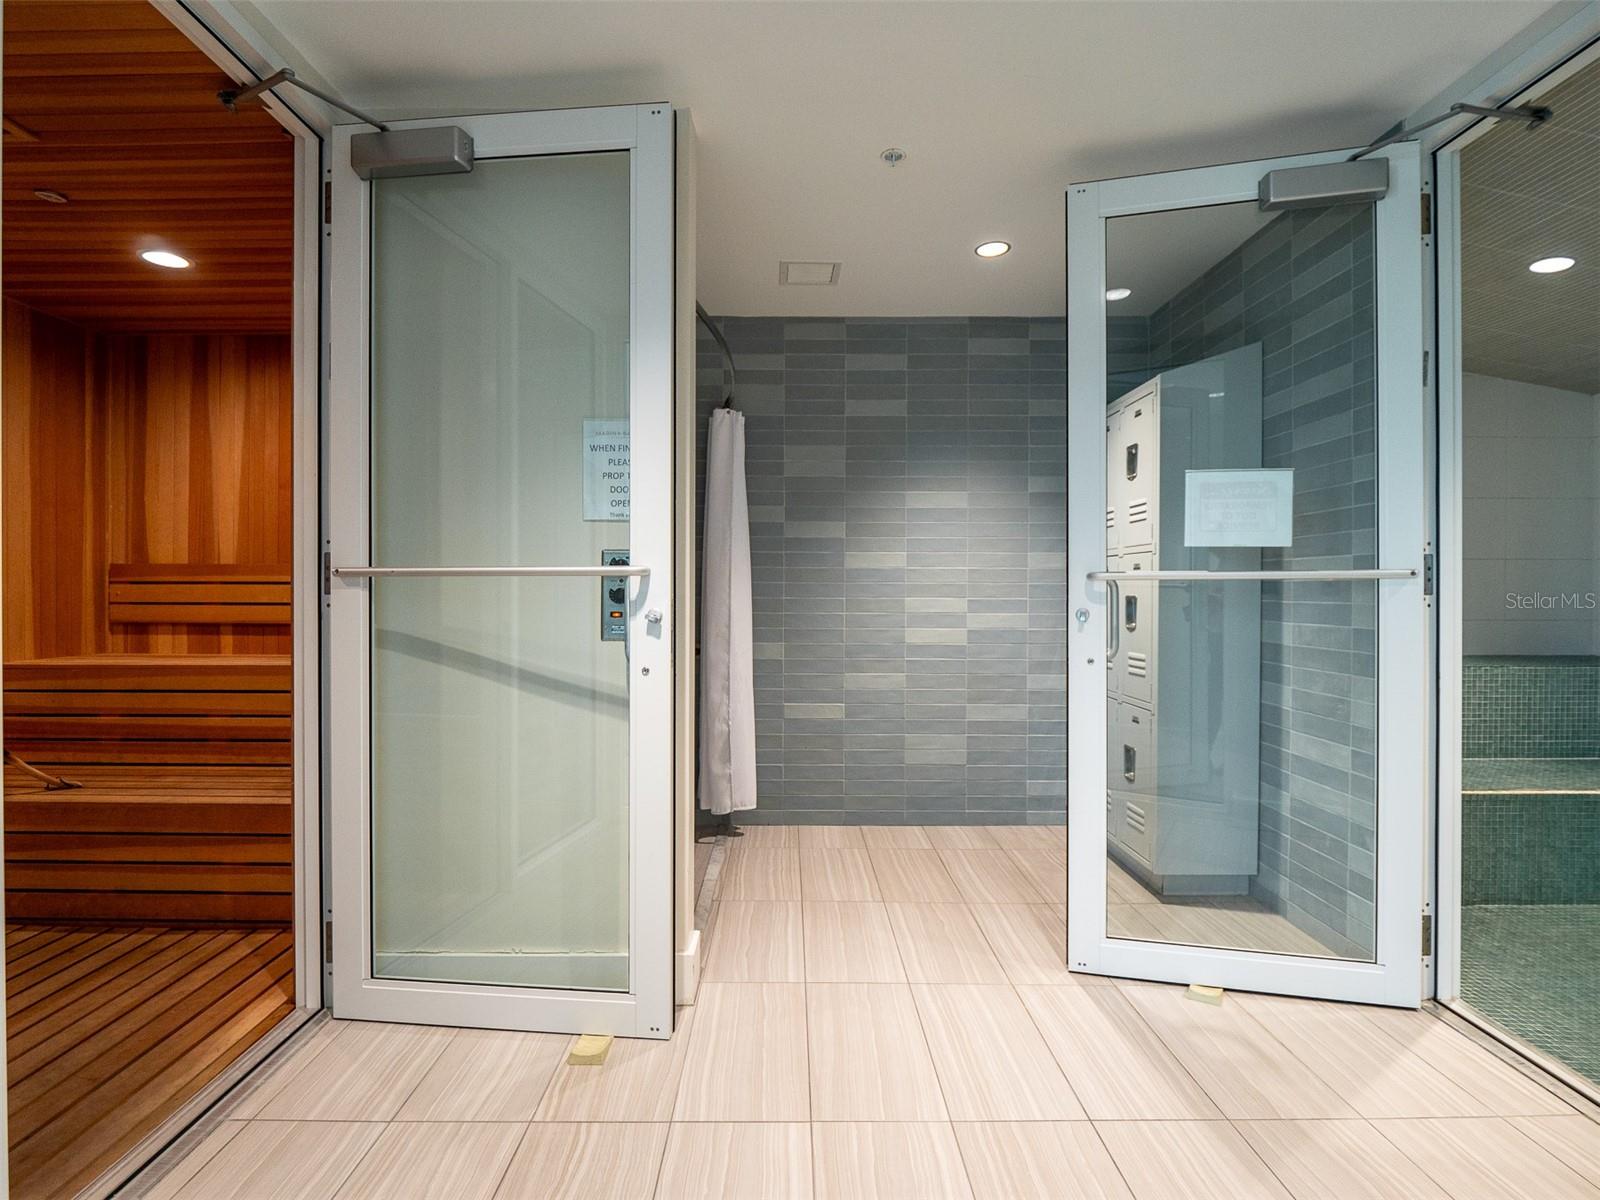 Lockers with shower, sauna and steam room for complete relaxation